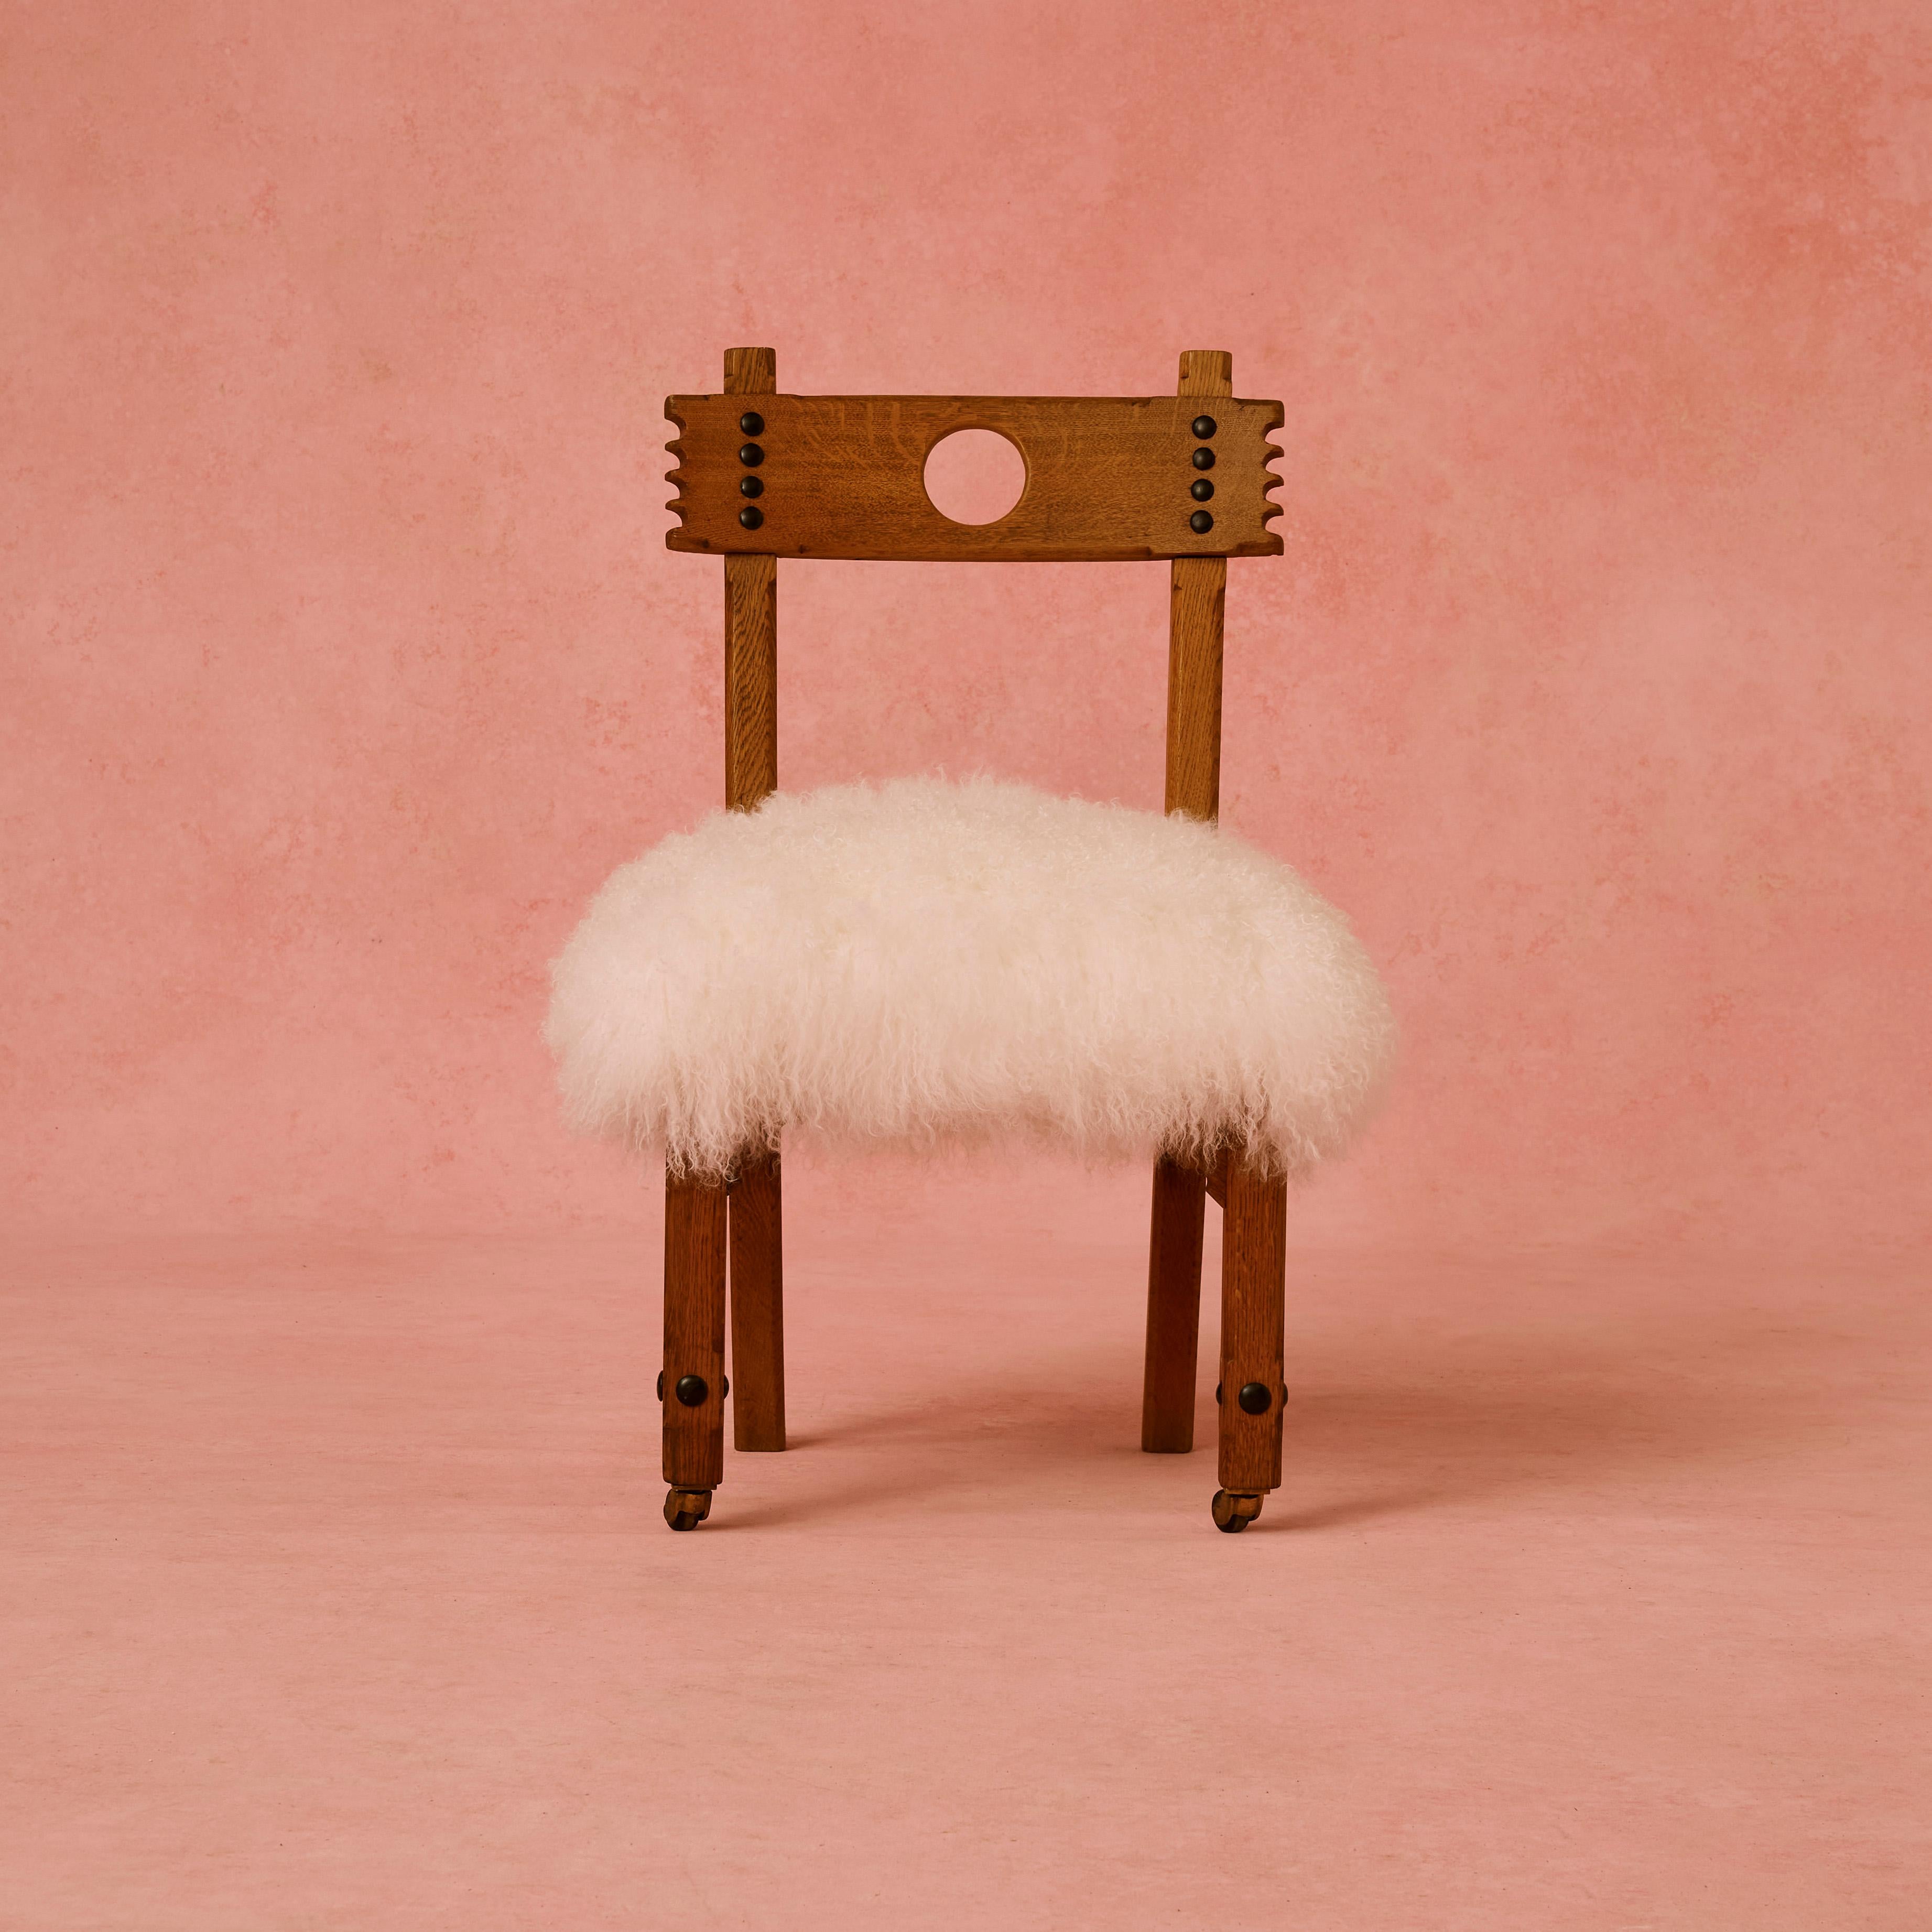 Reformed Gothic chair, attributed to Charles Bevan oak chair upholstered in White Mongolian sheepskin.
 